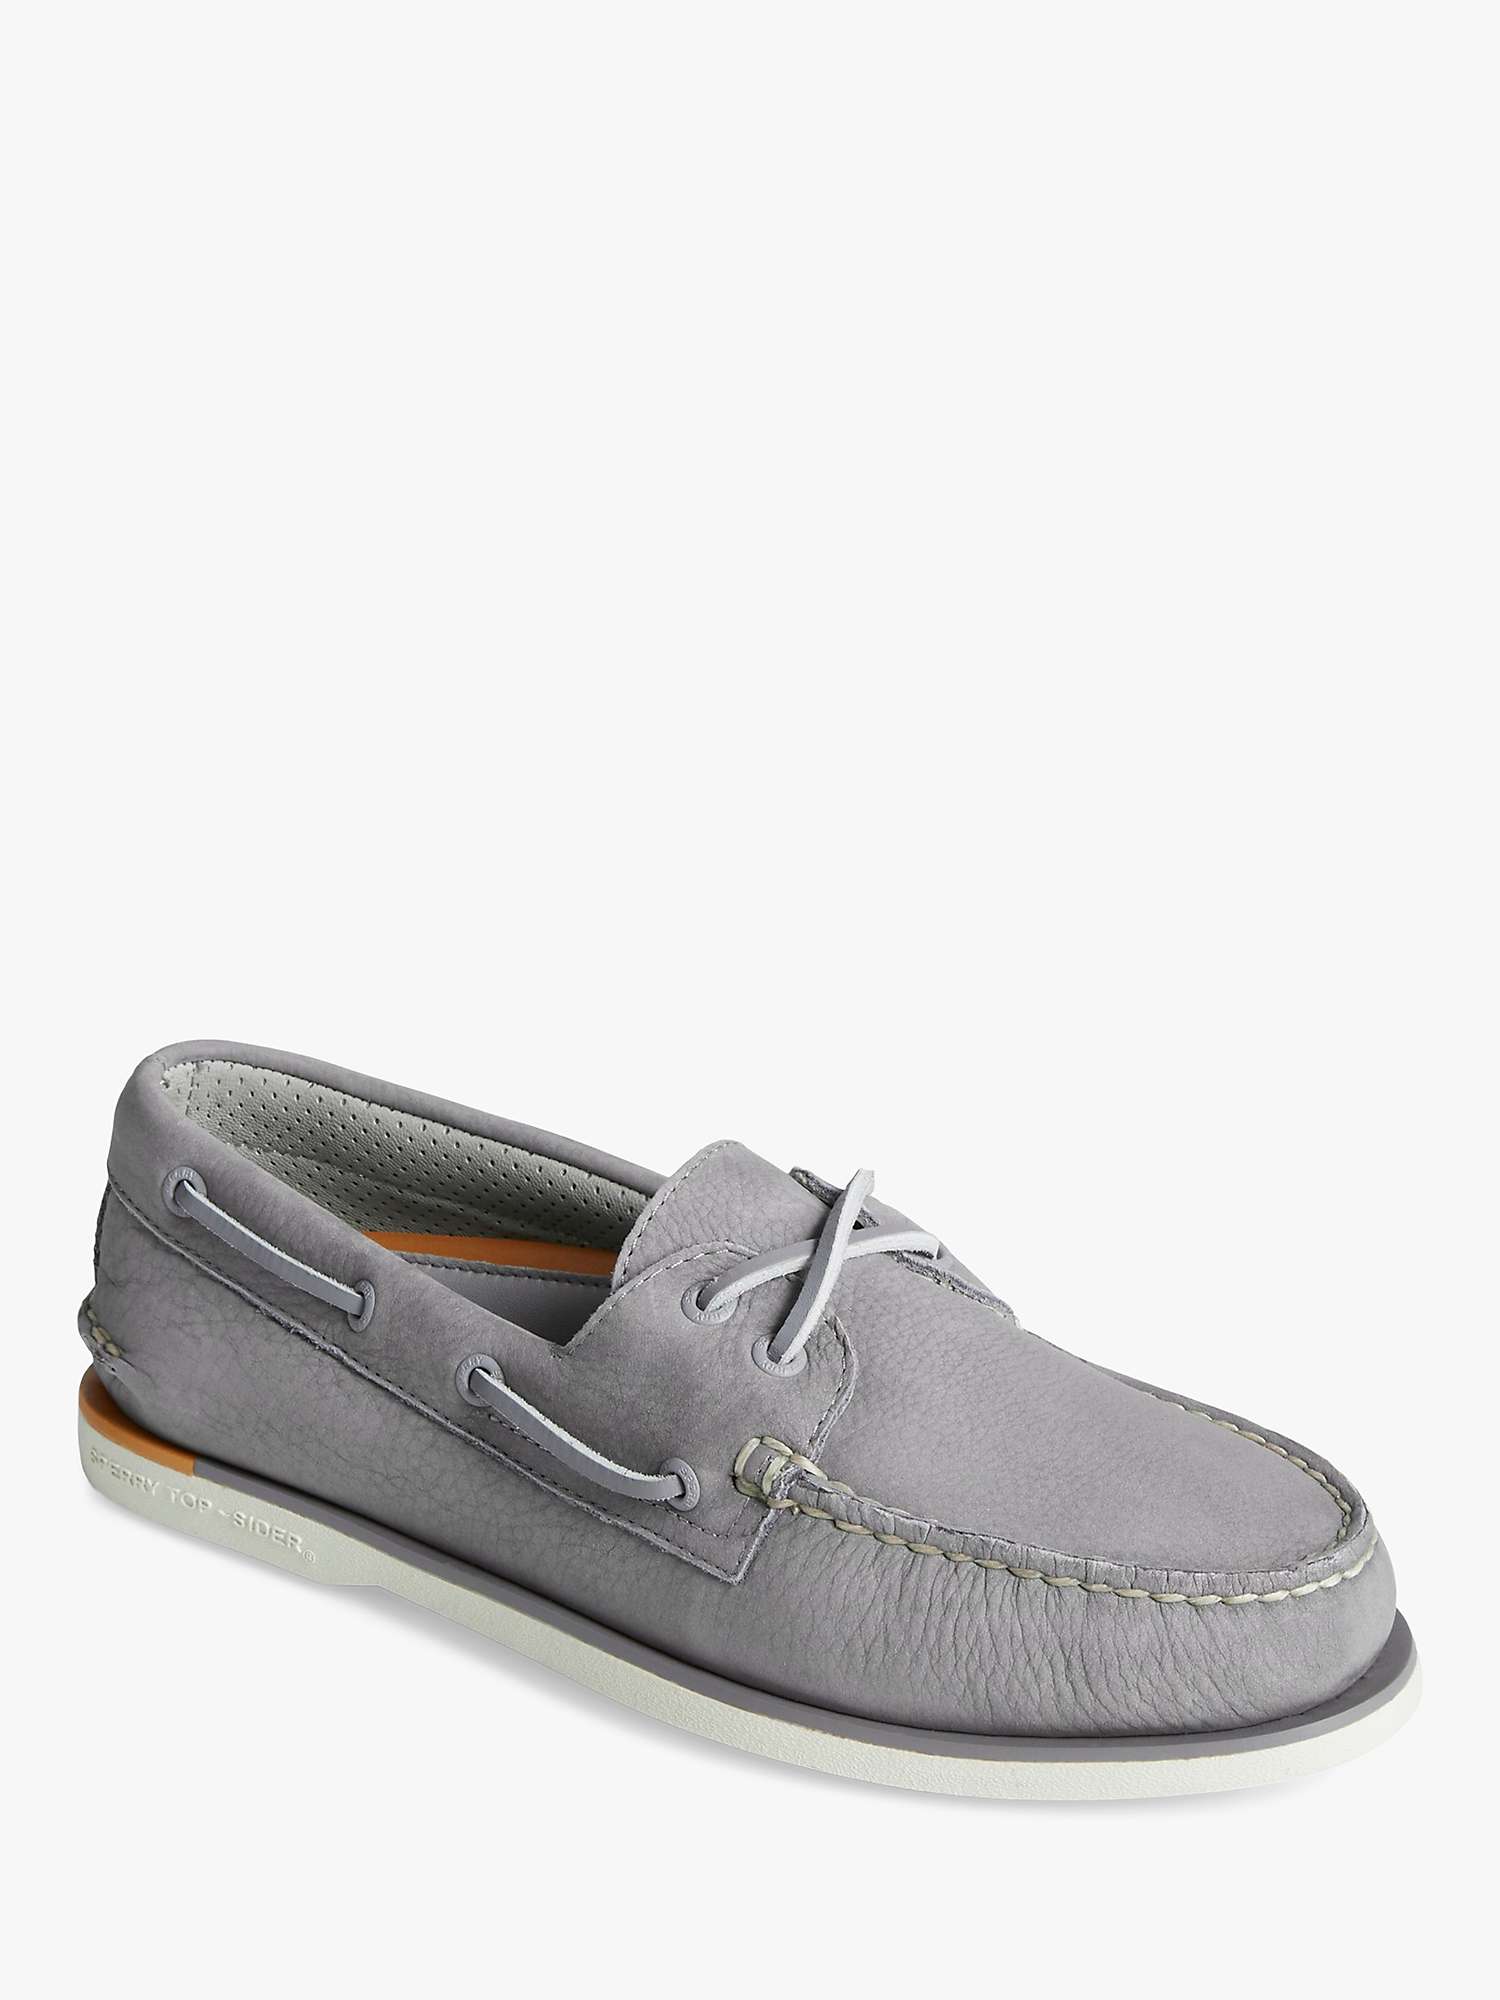 Sperry Gold Cup Authentic Original 2-Eye Nubuck Boat Shoes, Grey at ...